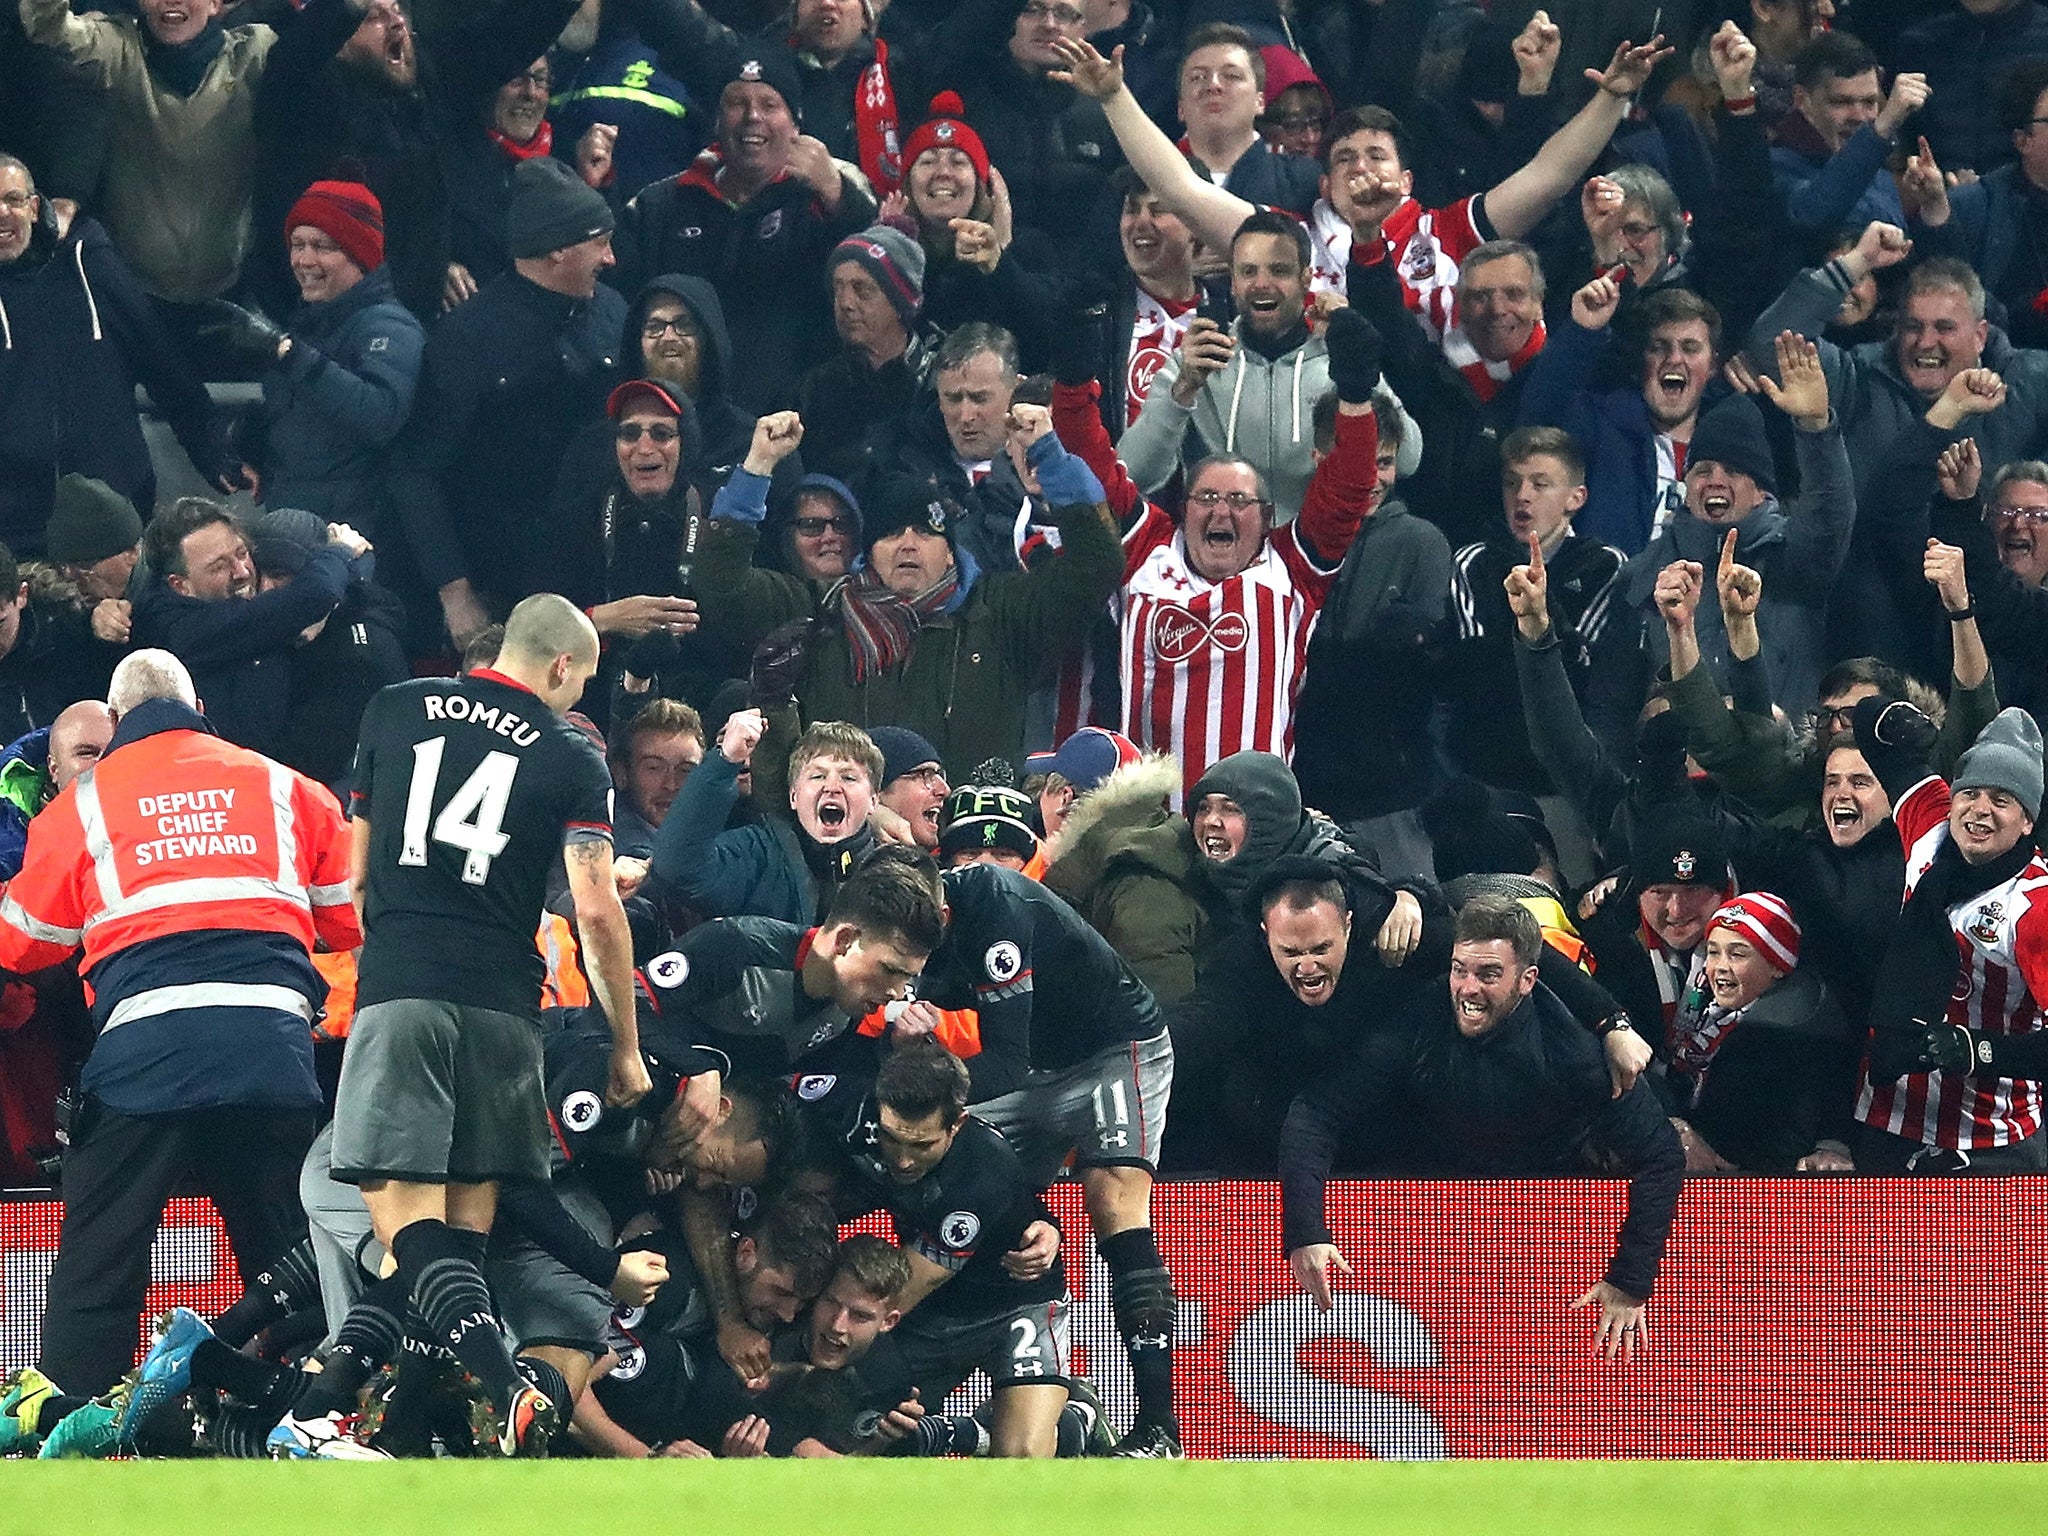 There was delirium in the away end when Shane Long struck late to seal Southampton's place in the final